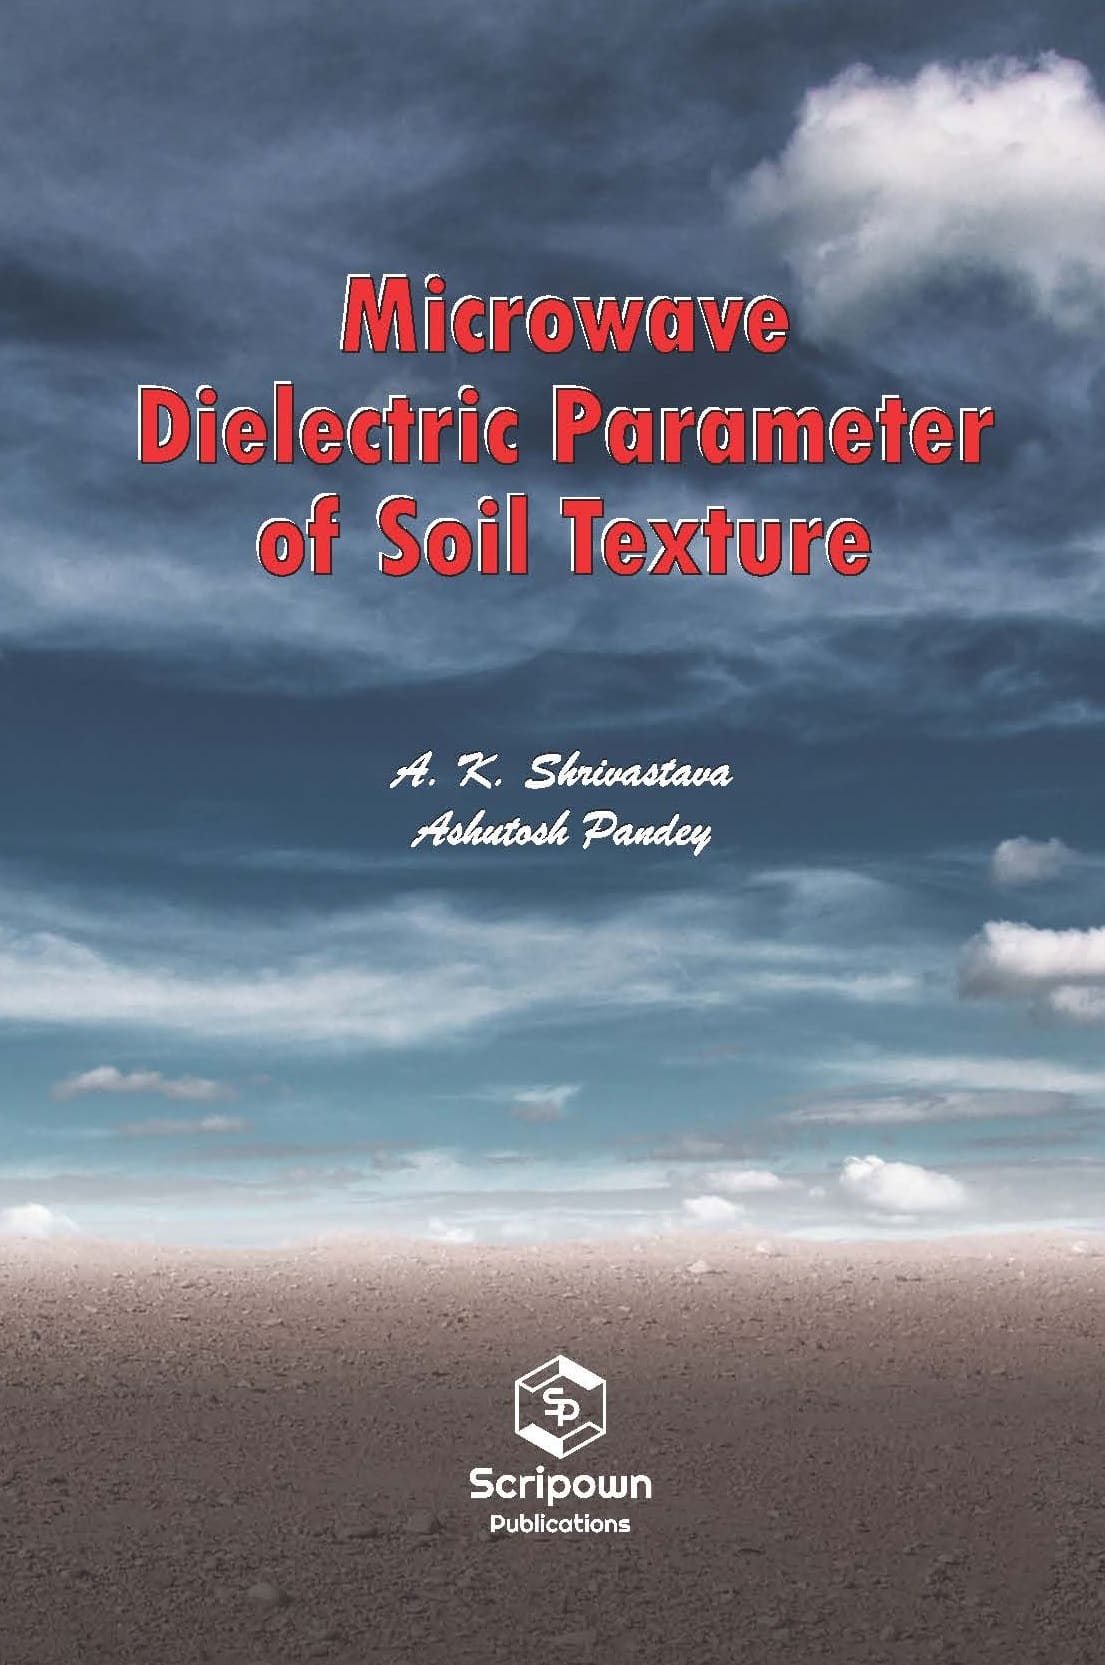 Microwave Dielectric Parameter of Soil Texture